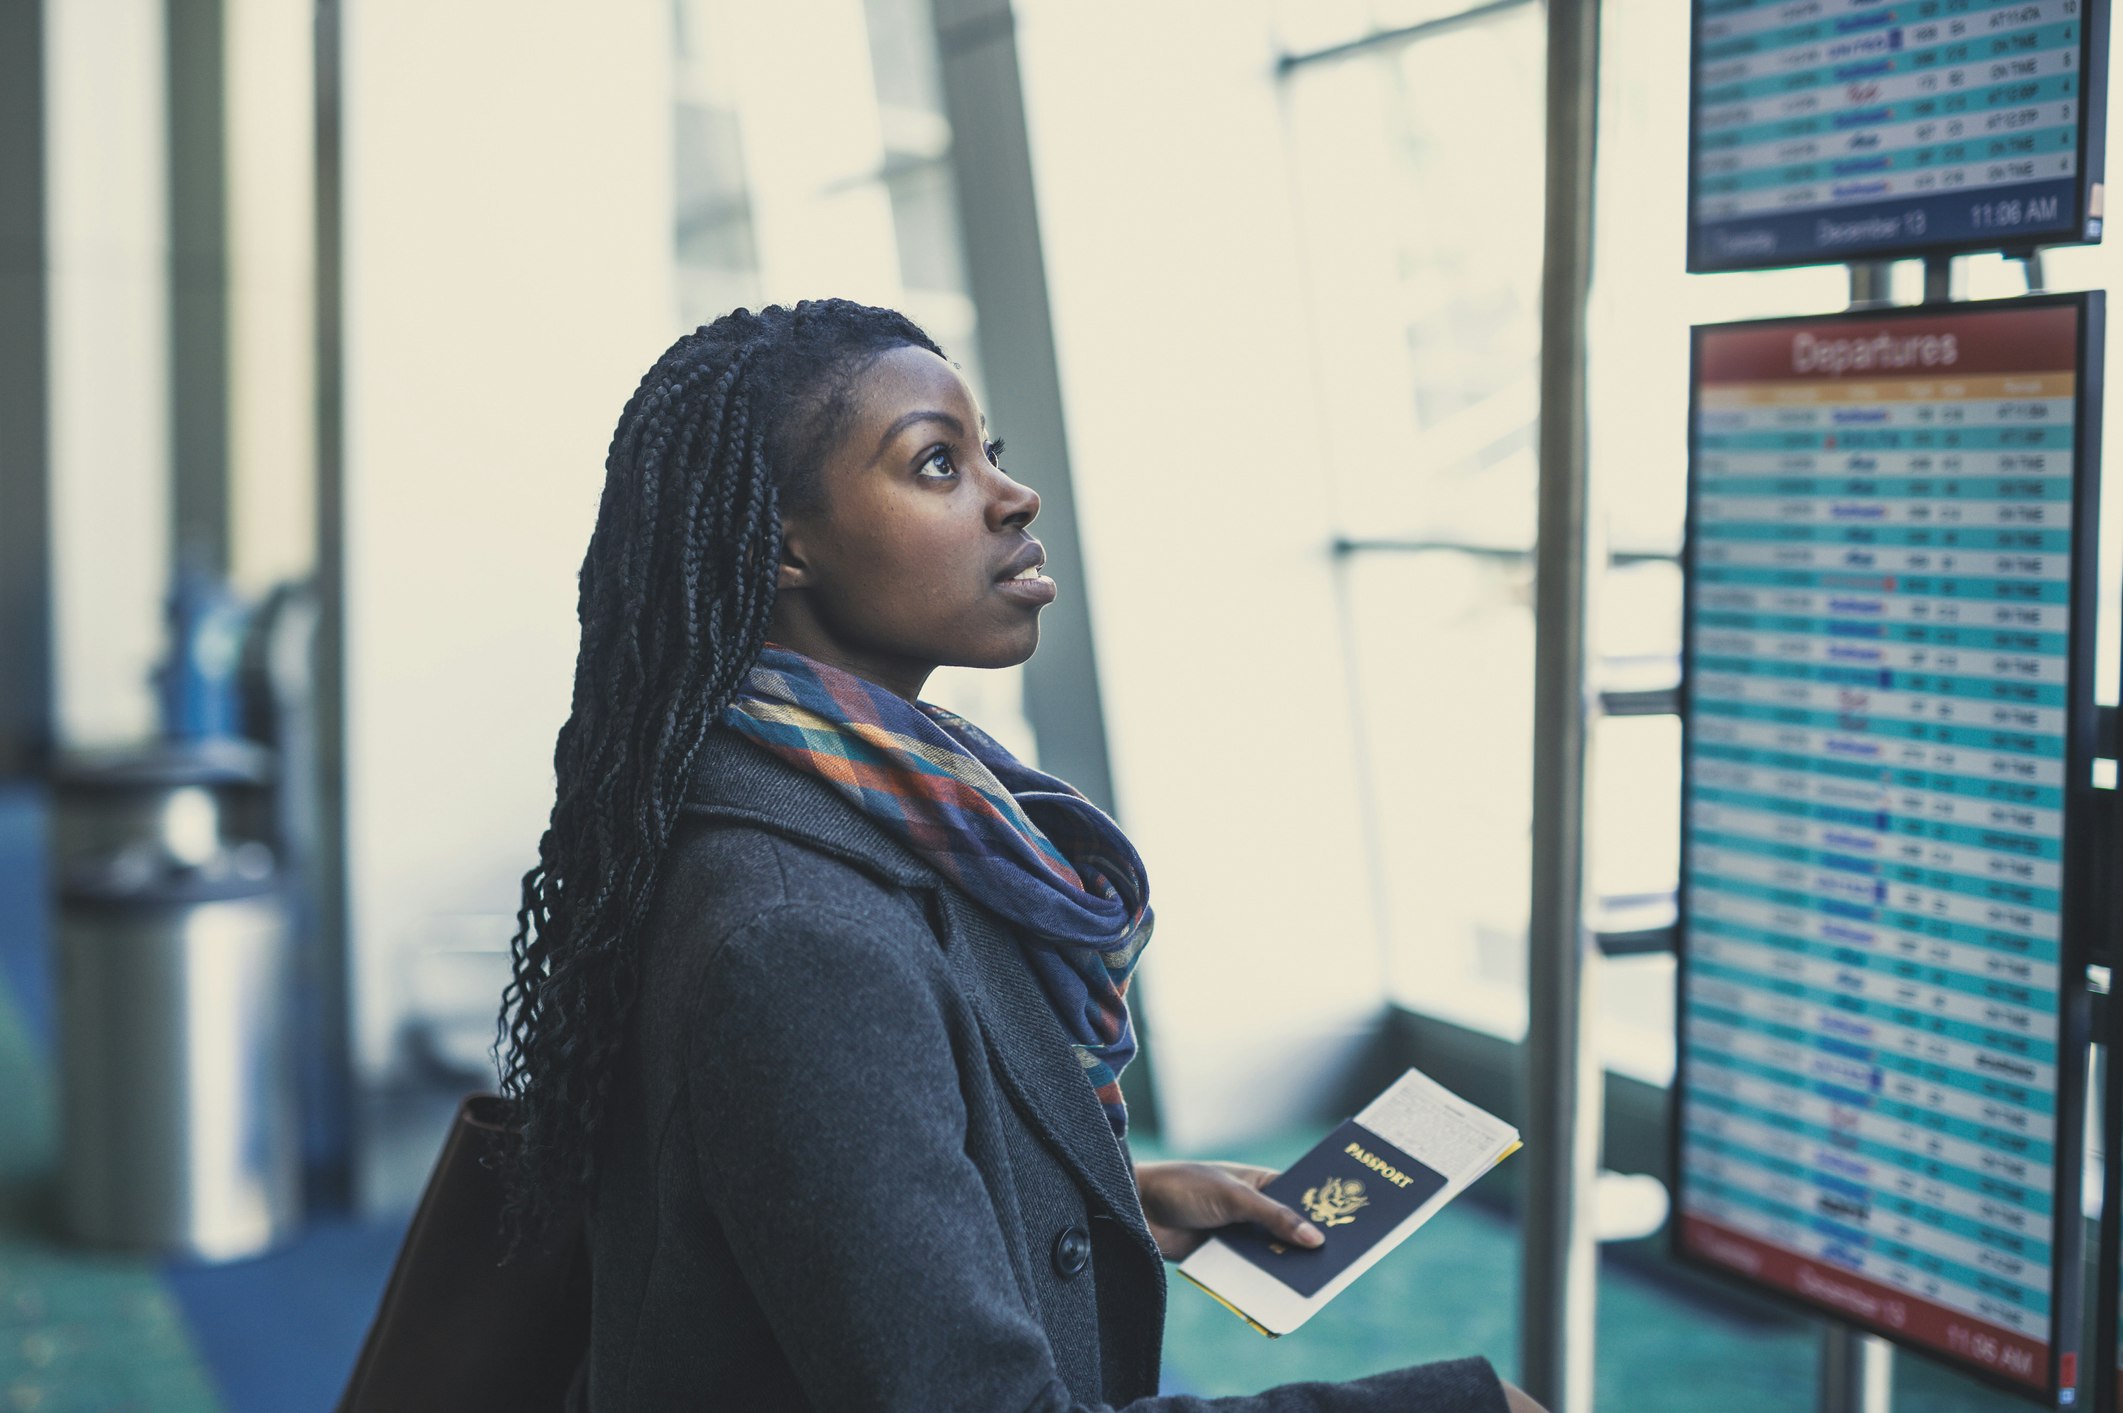 An African-American woman with long braids and a blue blazer looks up hopefully at a departures board in an airport. She is holding a passport and her tickets in her left hand